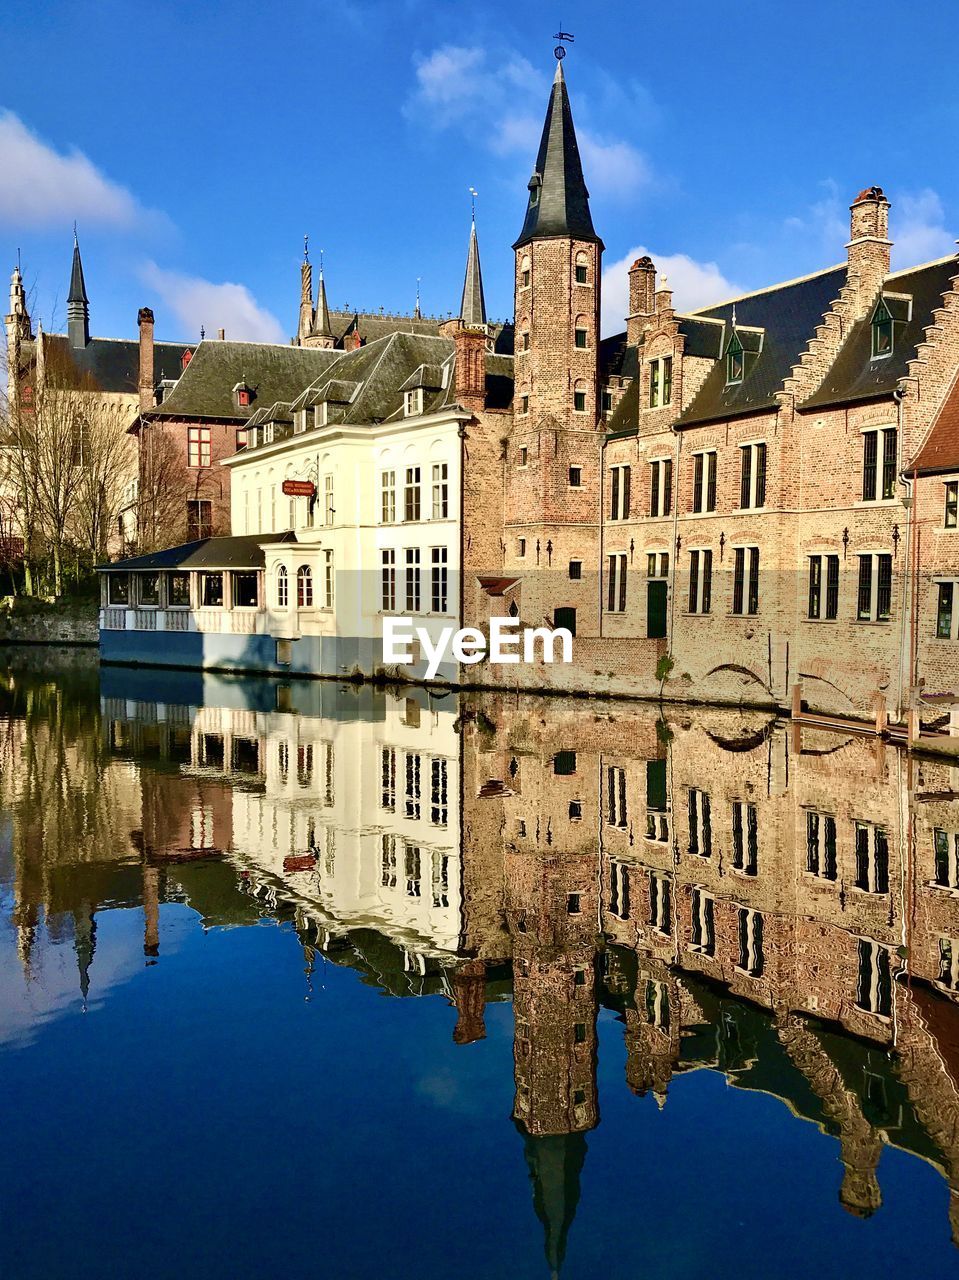 REFLECTION OF BUILDINGS IN WATER